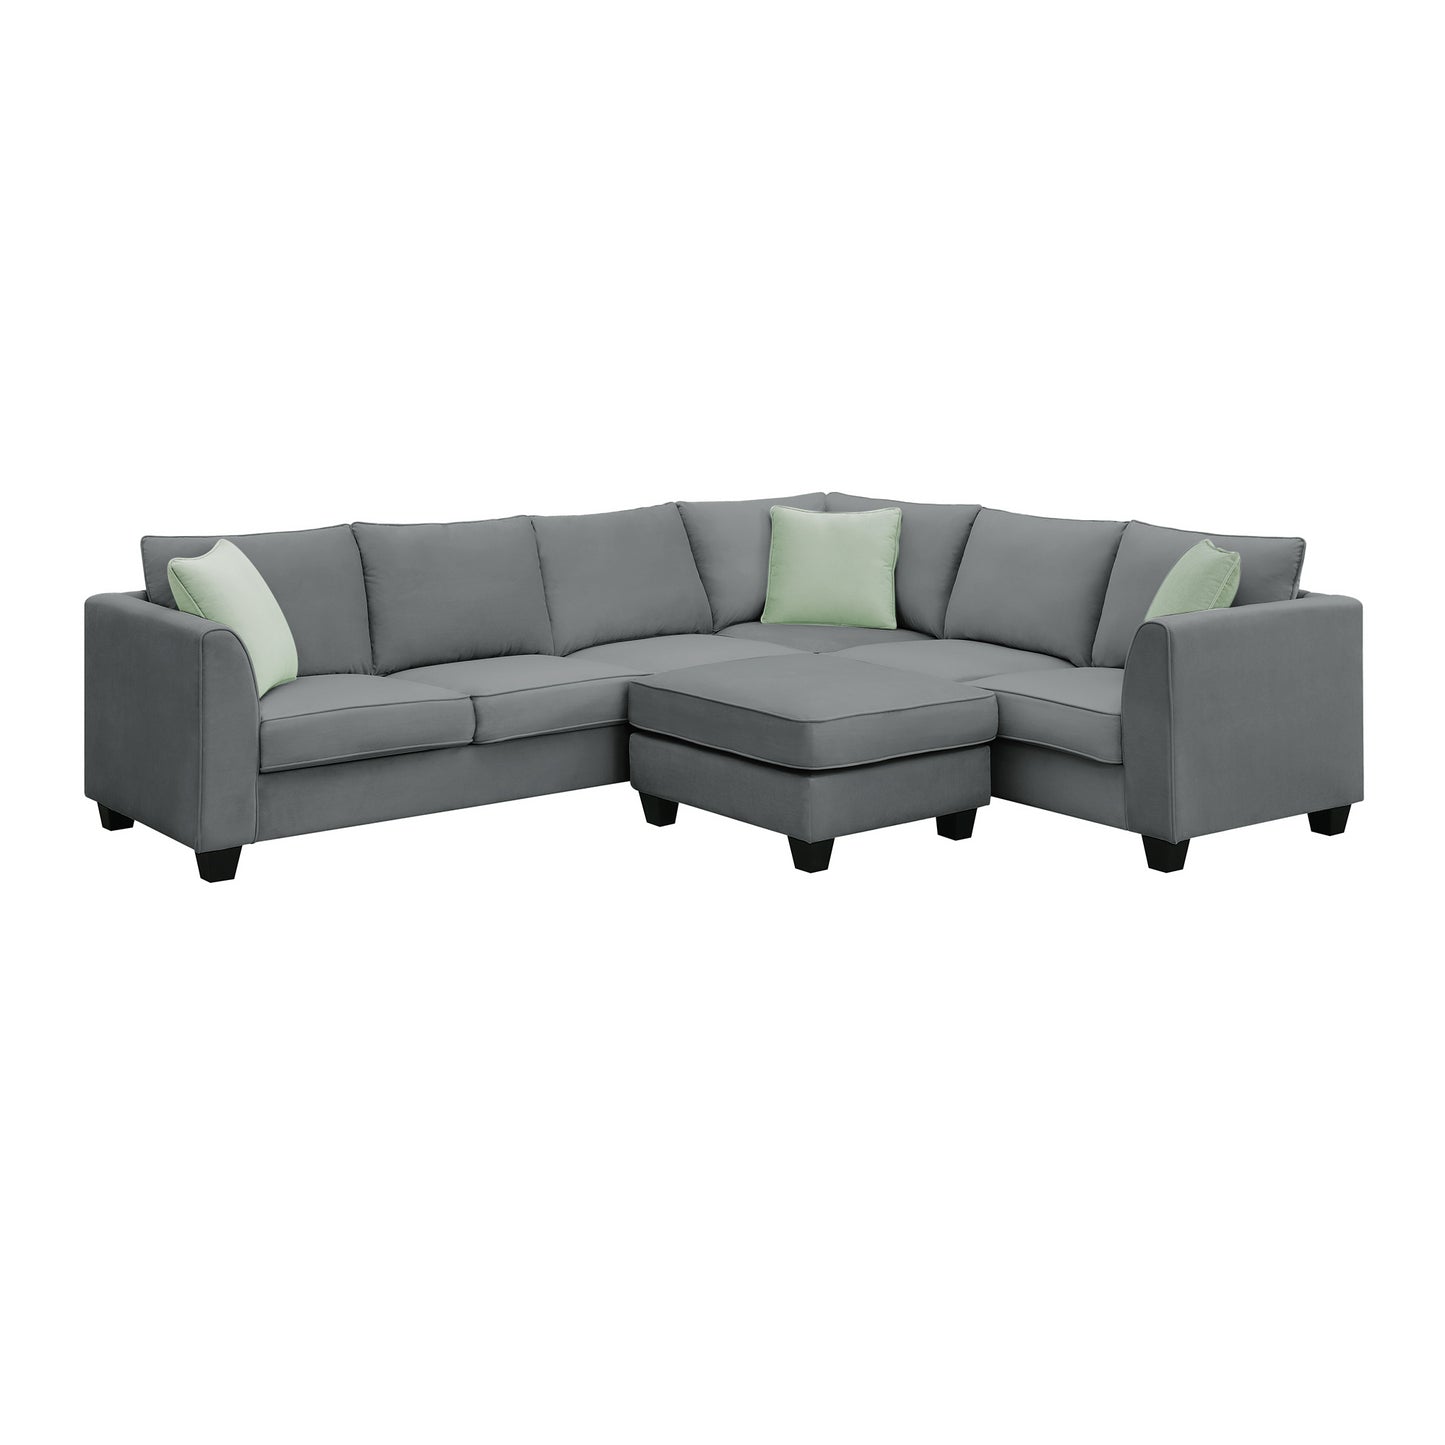 1st Choice Sectional Sofa Couches Living Room Sets 7 Seats w/ Ottoman